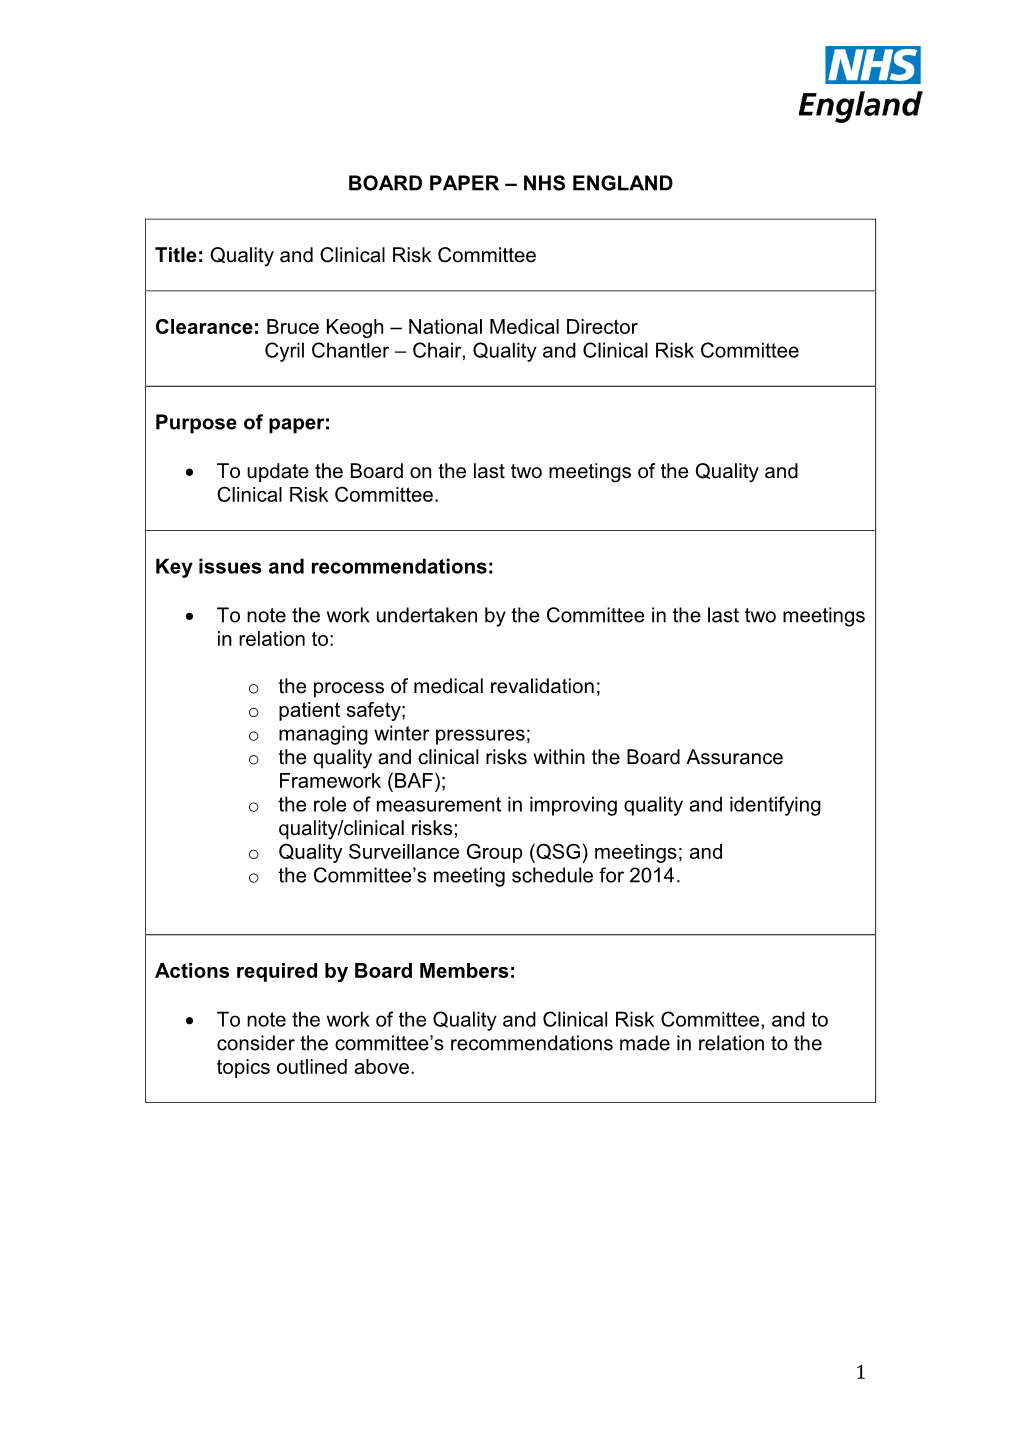 1 BOARD PAPER – NHS ENGLAND Title: Quality and Clinical Risk